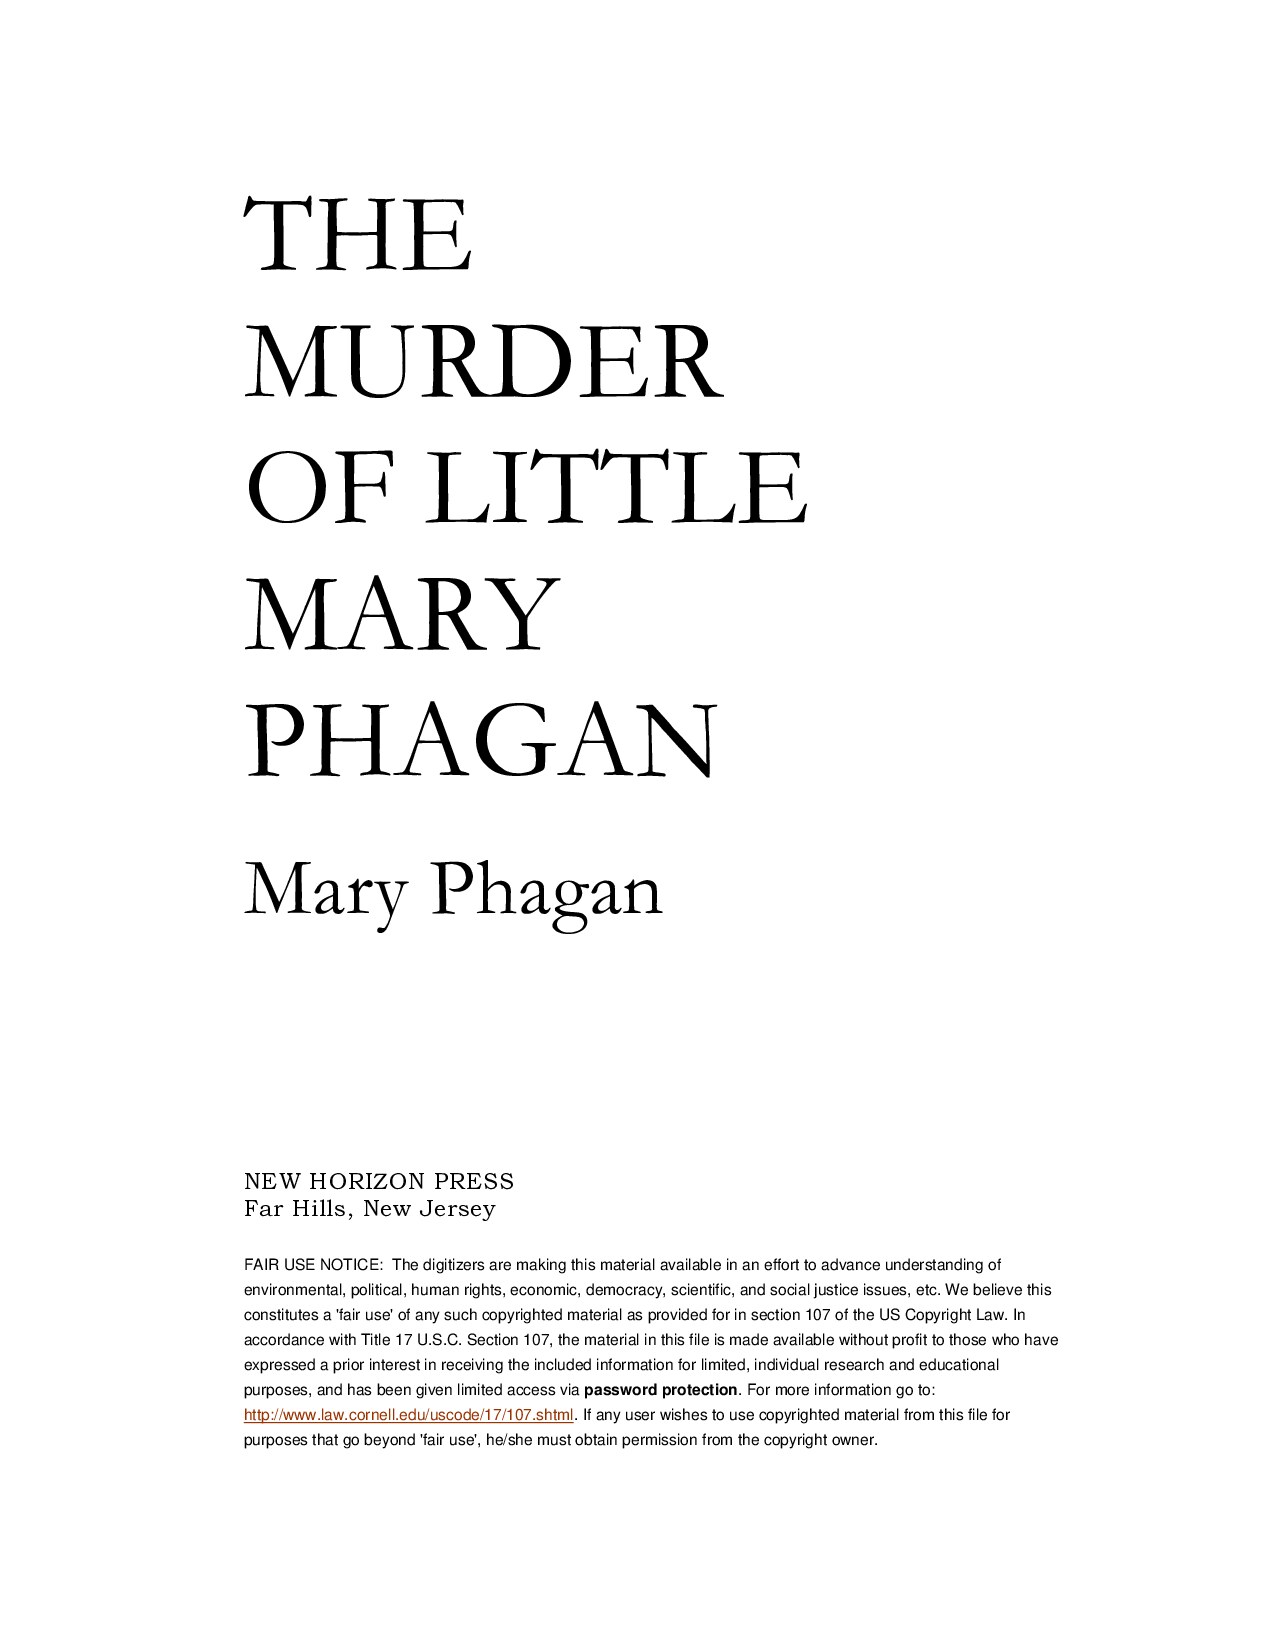 THE MURDER OF LITTLE MARY PHAGAN